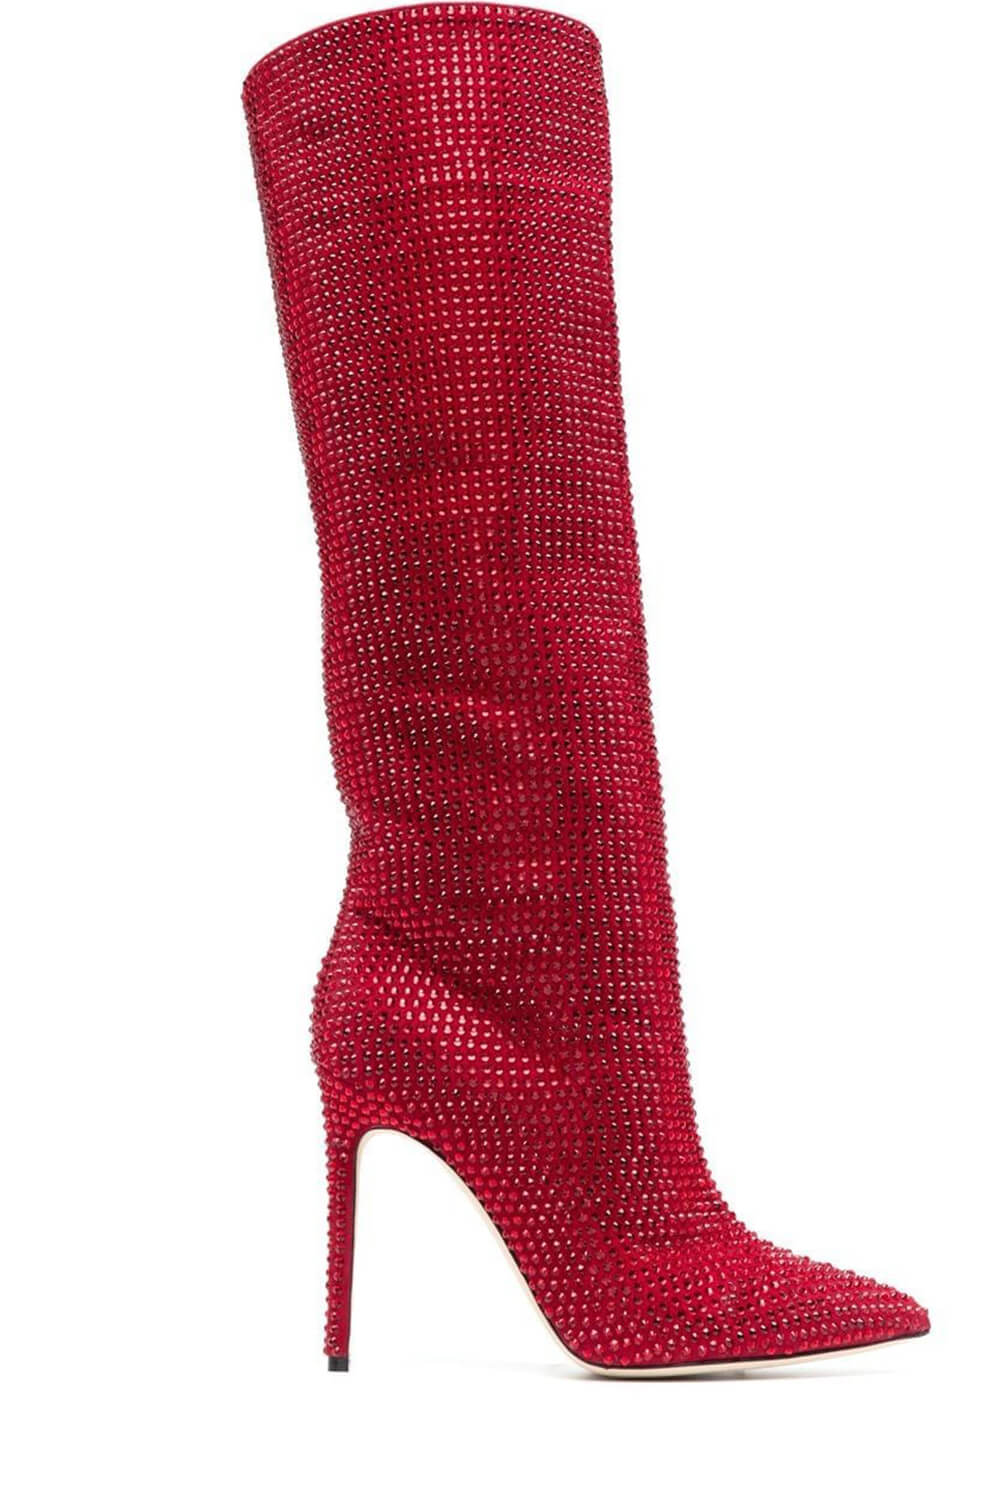 Gem Embellished Diamante Pointed Toe Stiletto Heel Knee High Long Boot - Red/Pink/Silver/Green